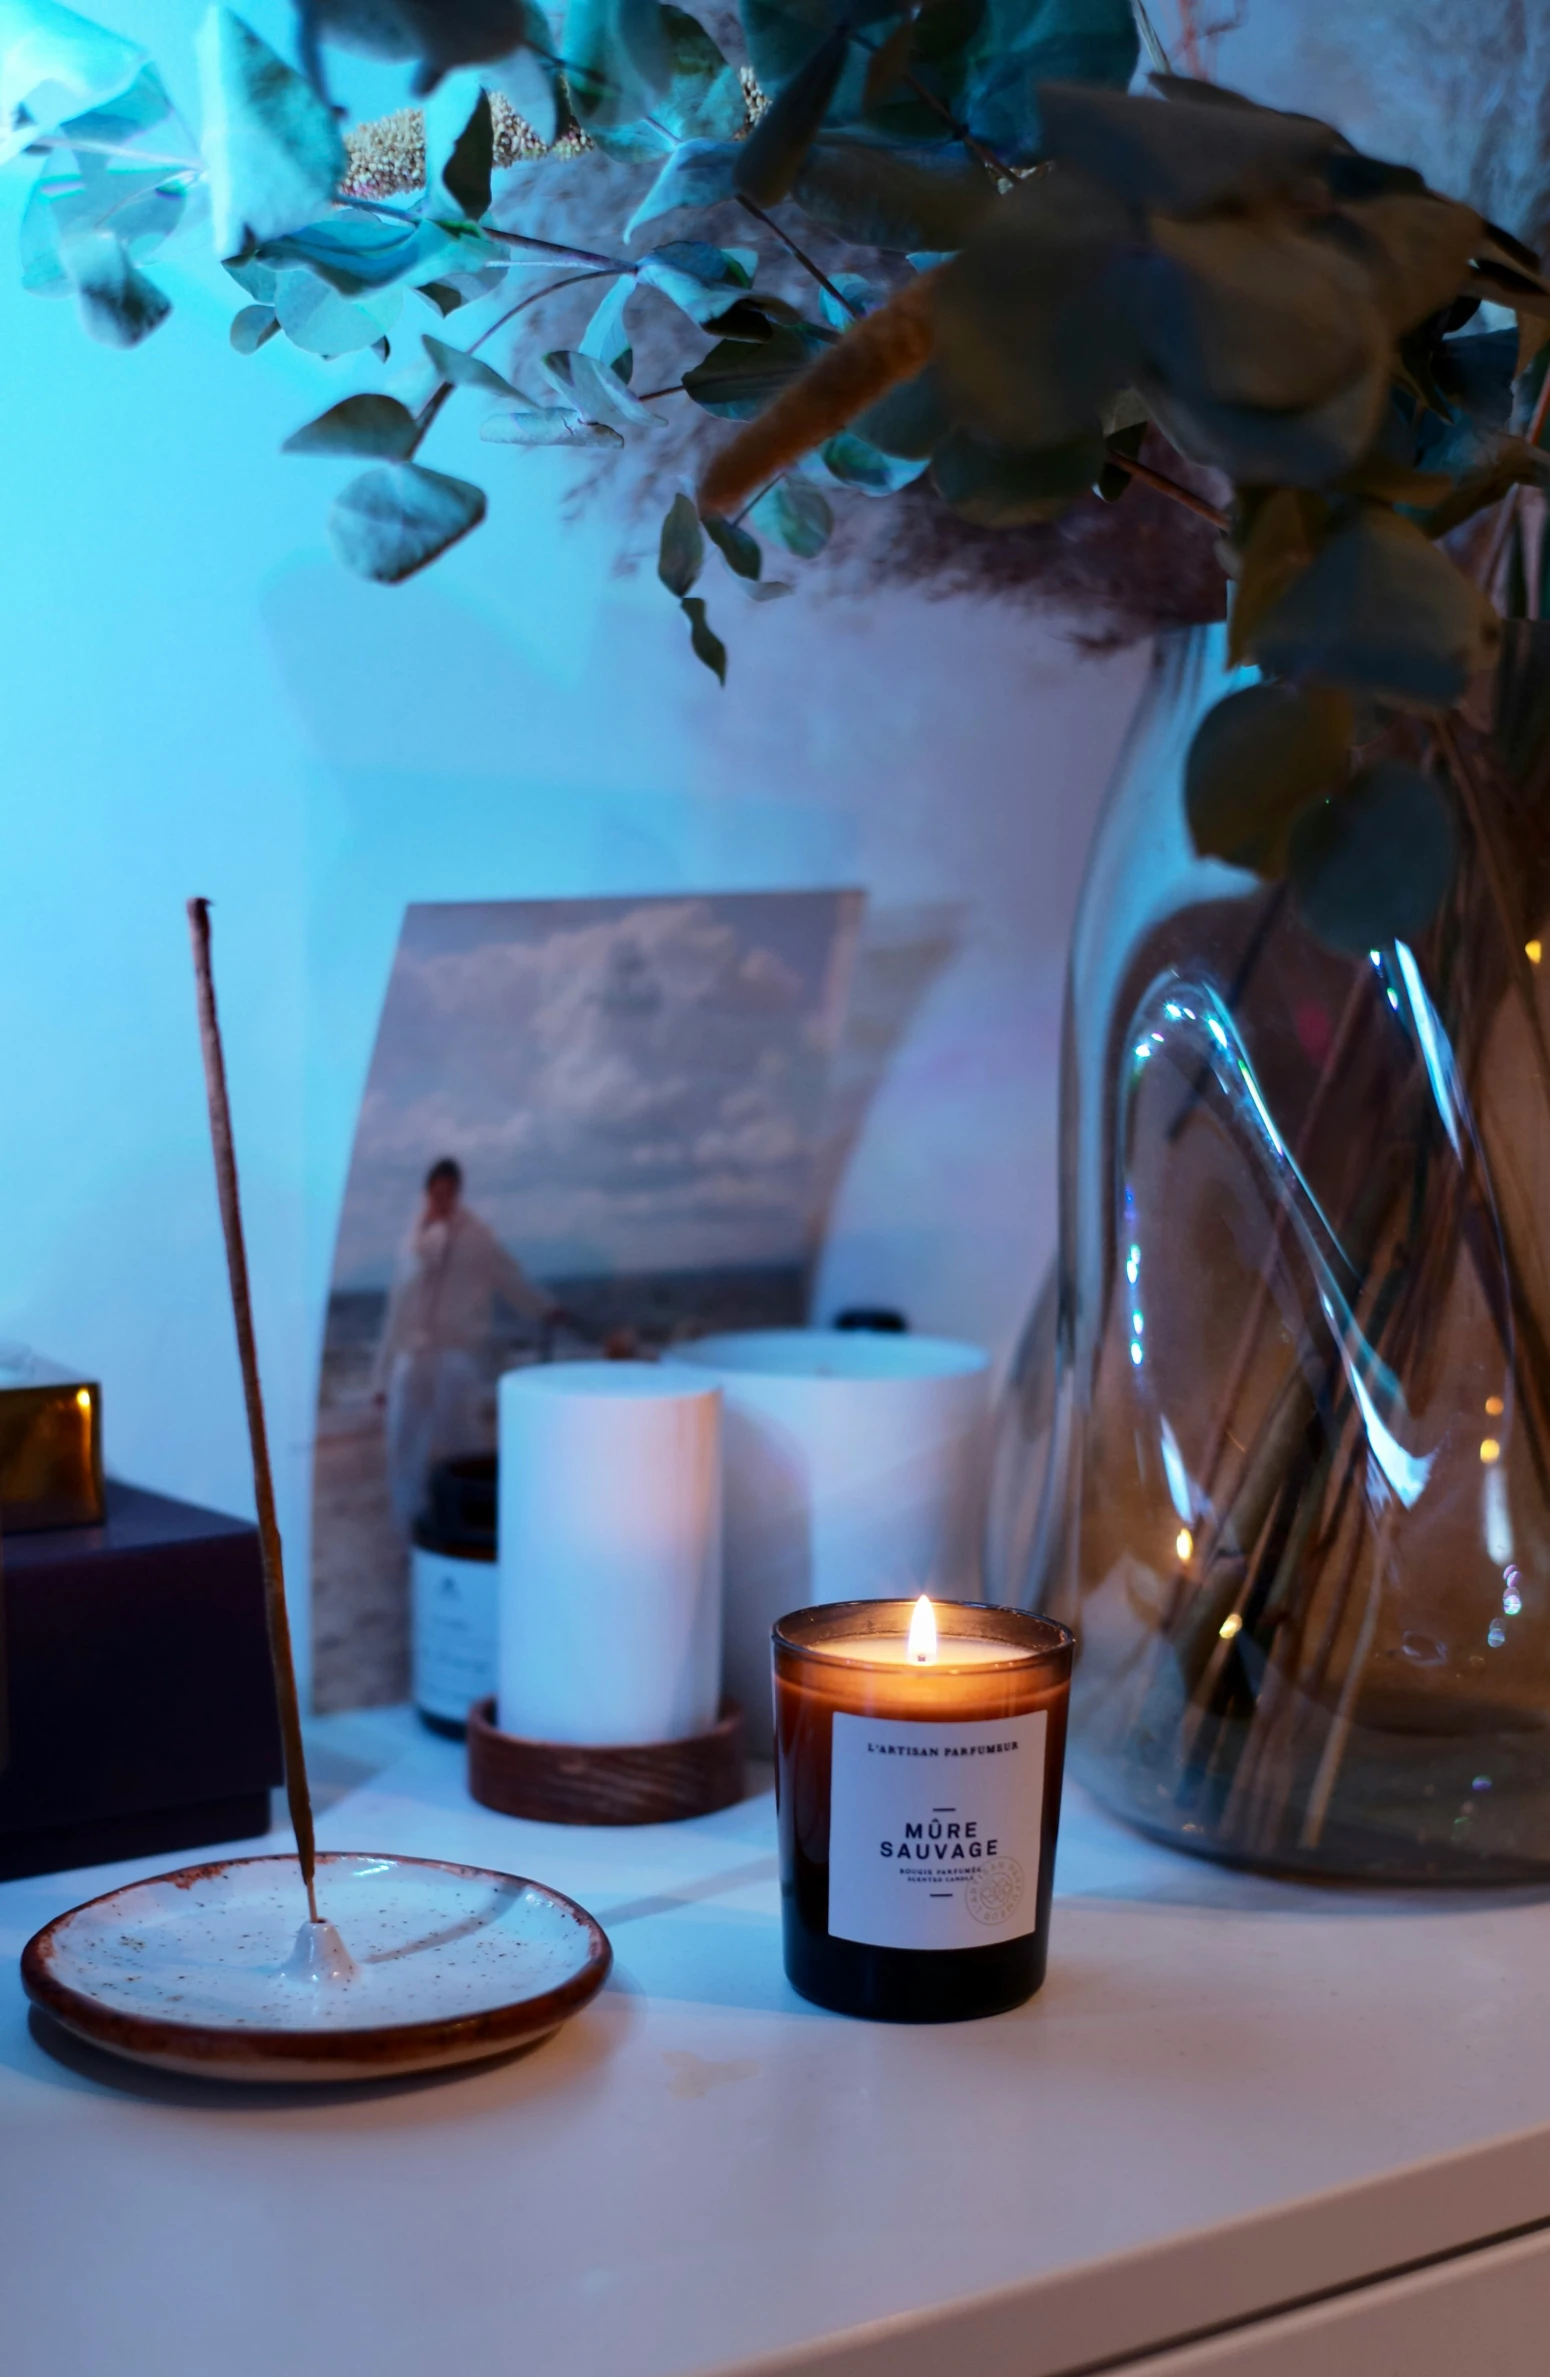 an arrangement of candles, pictures, and other items are placed on the table